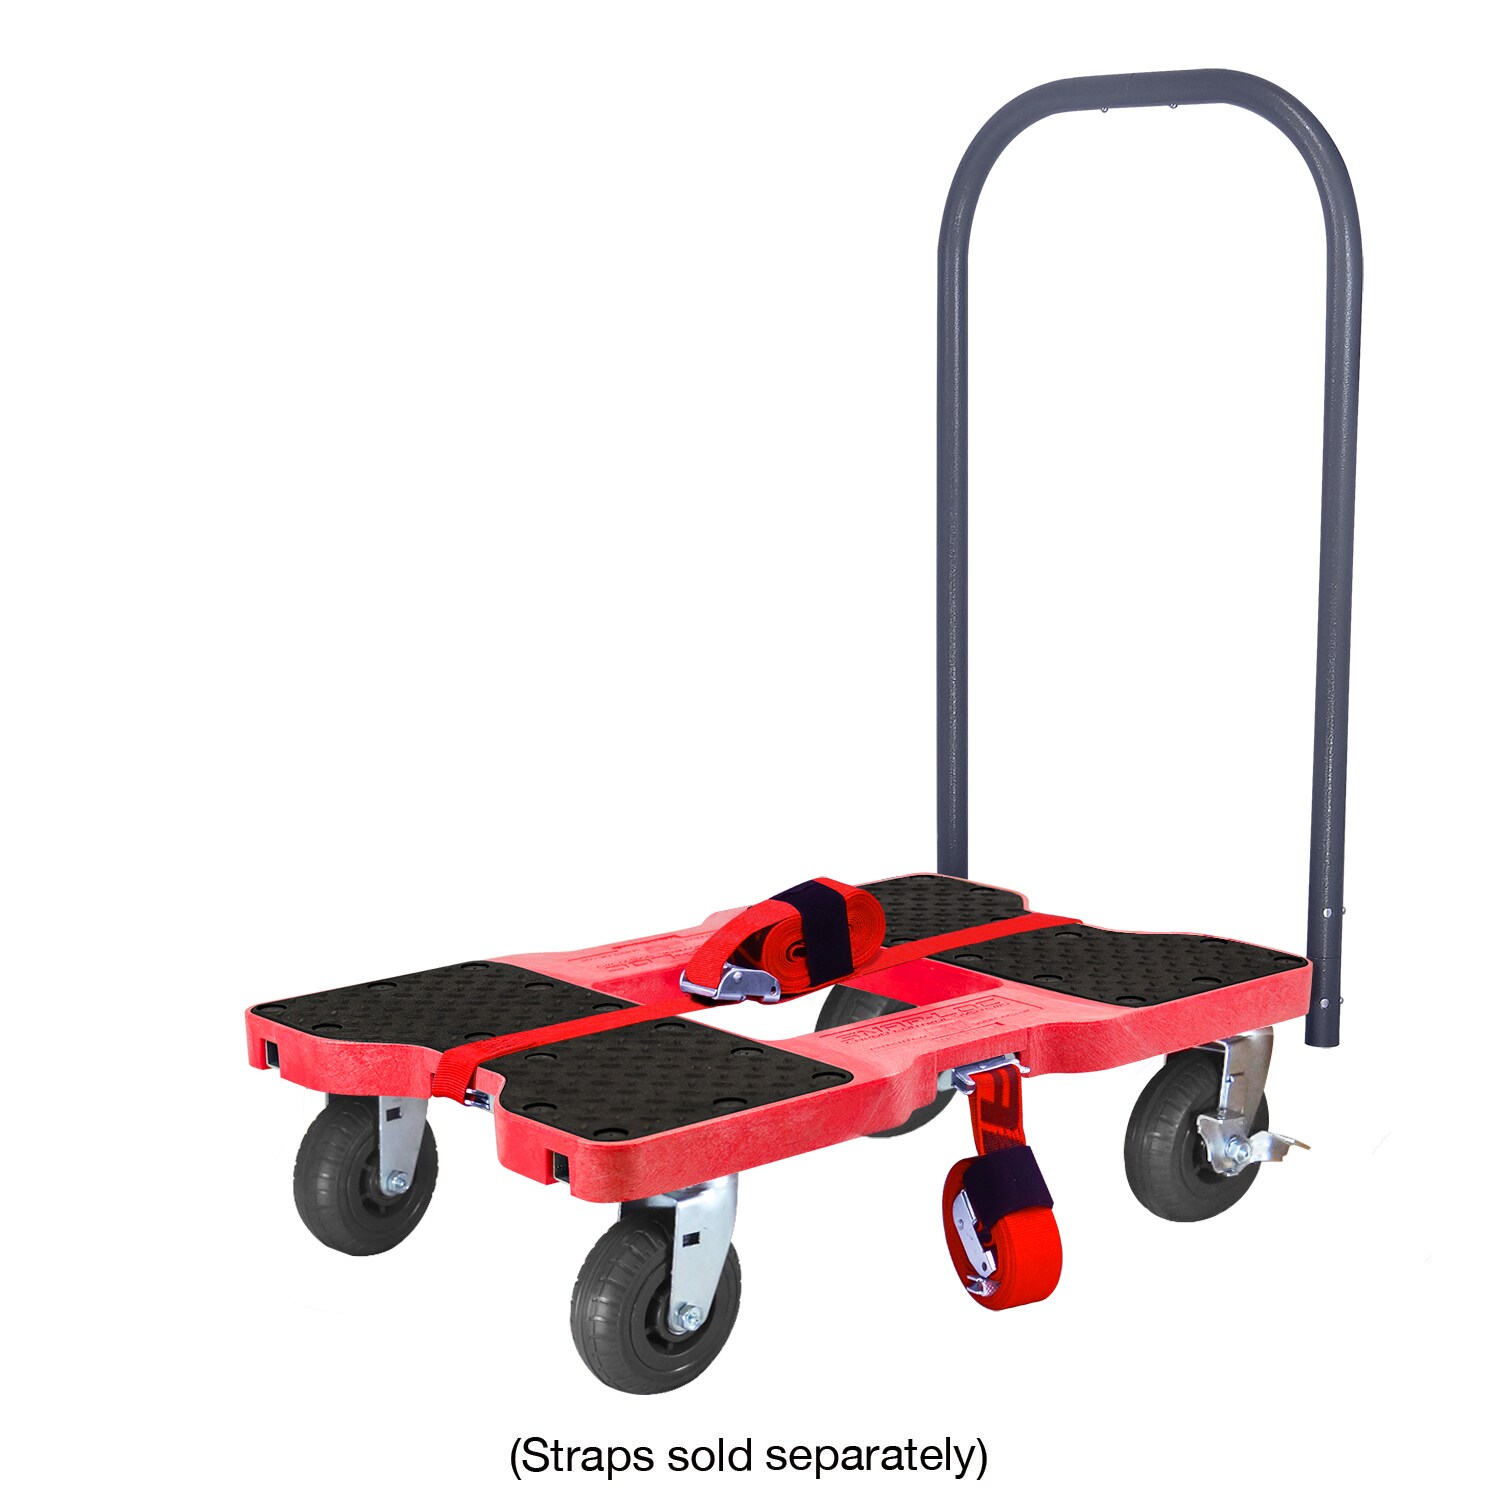 EXTENDABLE  COLLAPSIBLE ALUMINUM PLATFORM HAND CART TRUCK DOLLY STURDY 220LBS 